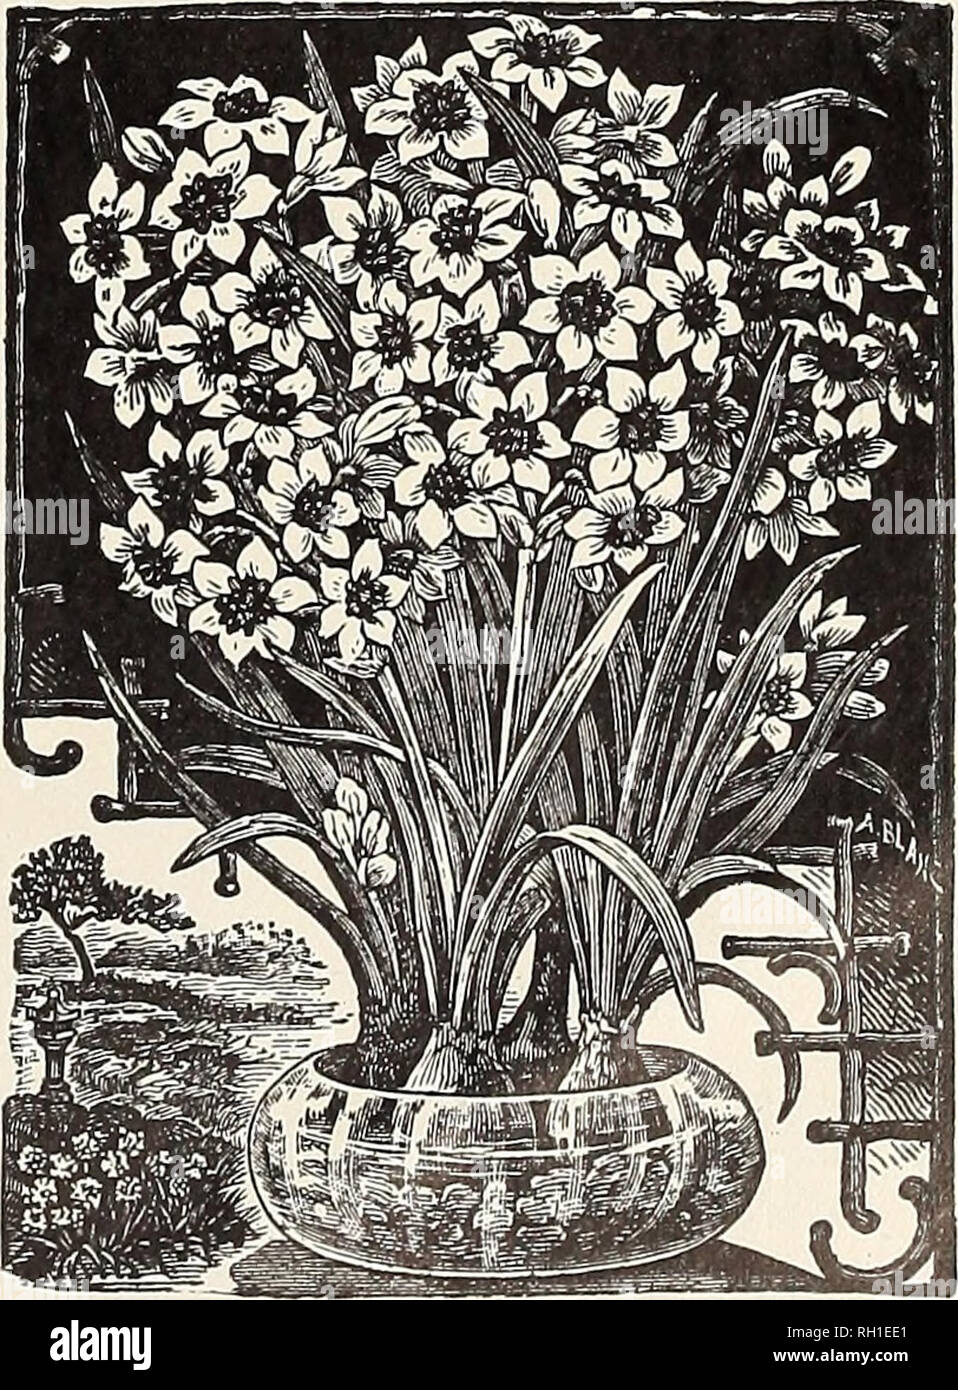 . Bulbs and plants : autumn 1907. Flowers Seeds Catalogs; Bulbs (Plants) Seeds Catalogs; Nurseries (Horticulture) Catalogs; Plants, Ornamental Catalogs. DOUBLE NARCISSUS. Albus Plenus 0«loratus—Pure white, sw^eet scented, resem- bles a Gardenia Each Doz. 100 25 $165 Incomparable (Butter and Eggs)- scented Orange Phoenix—^White and orange -Sulphur yellow^. sweet DOUBLE VOJV SION—TRUE DUTCH. Extra Selected Large Bulbs—The finest of all double yellow Daffodils, used extensively for forcing as well as for bedding outdoors 3 Mammoth Double Nosed Bulbs—Selected bulbs that produce two or more flowers Stock Photo